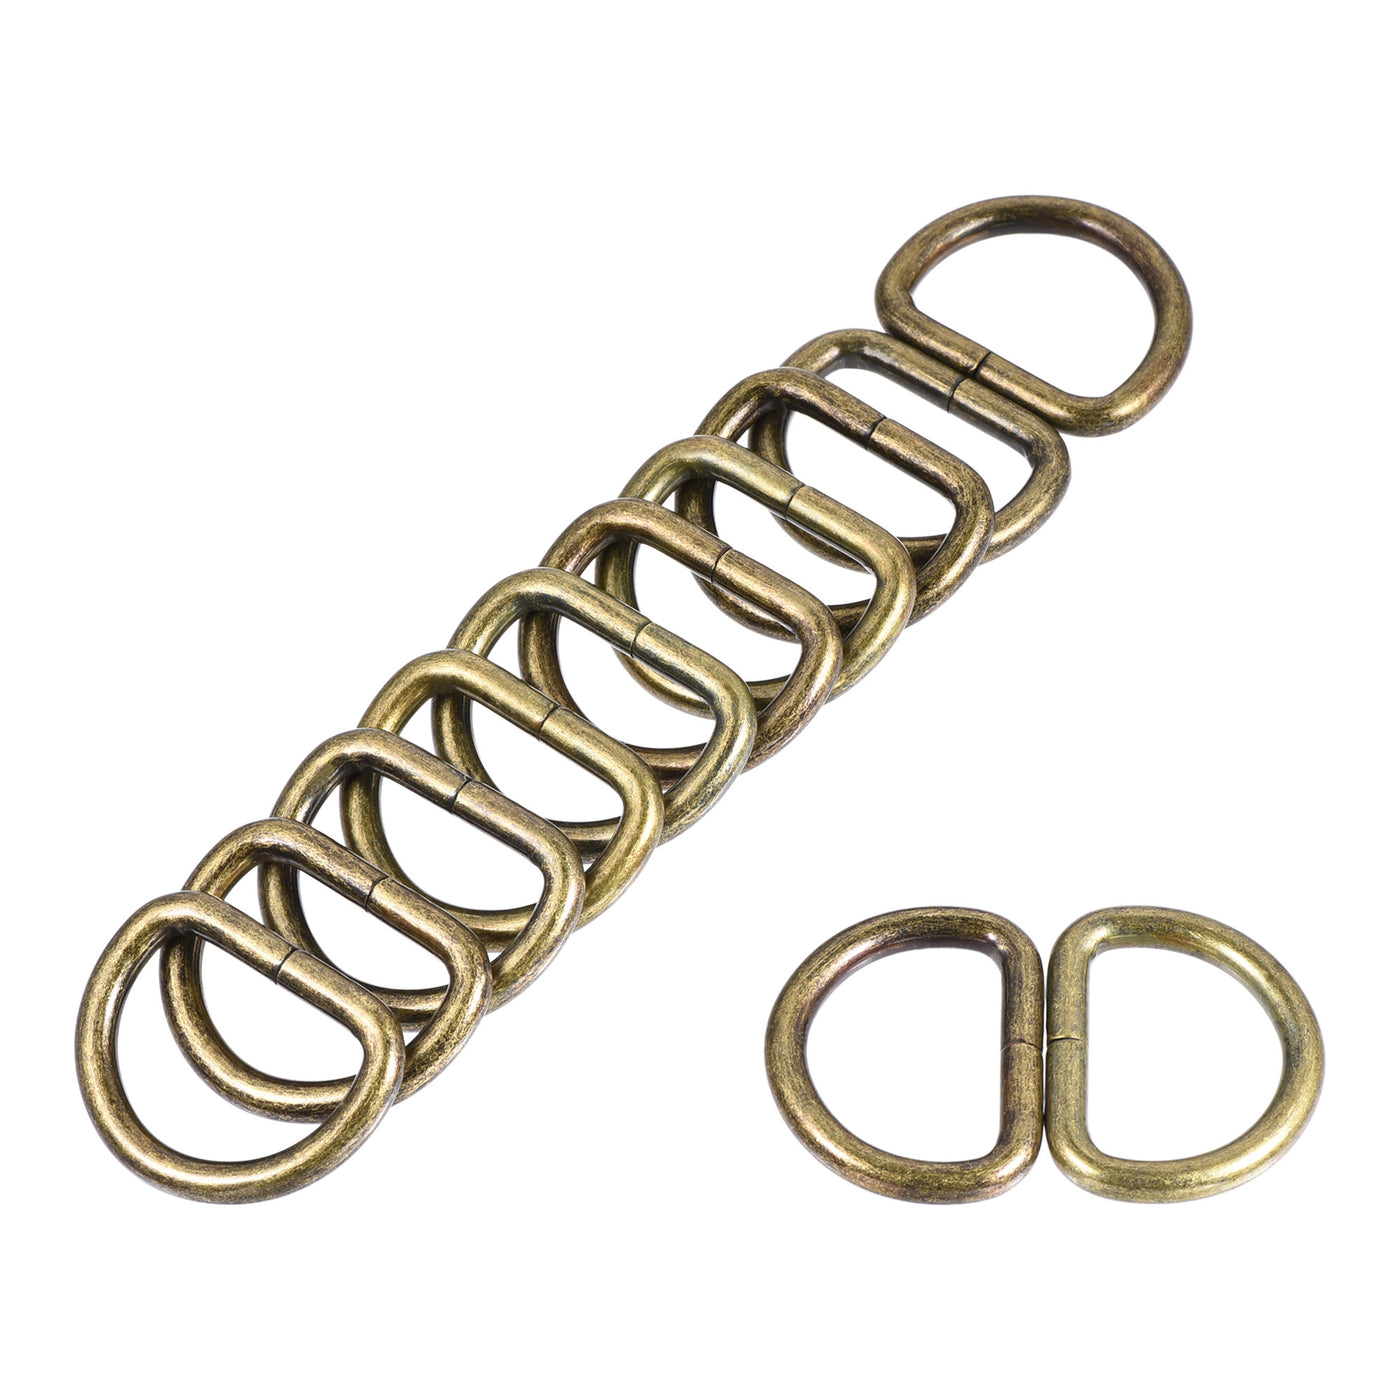 uxcell Uxcell Metal D Ring 0.98"(25mm) D-Rings Buckle for Hardware Bags Belts Craft DIY Accessories Bronze Tone 20pcs